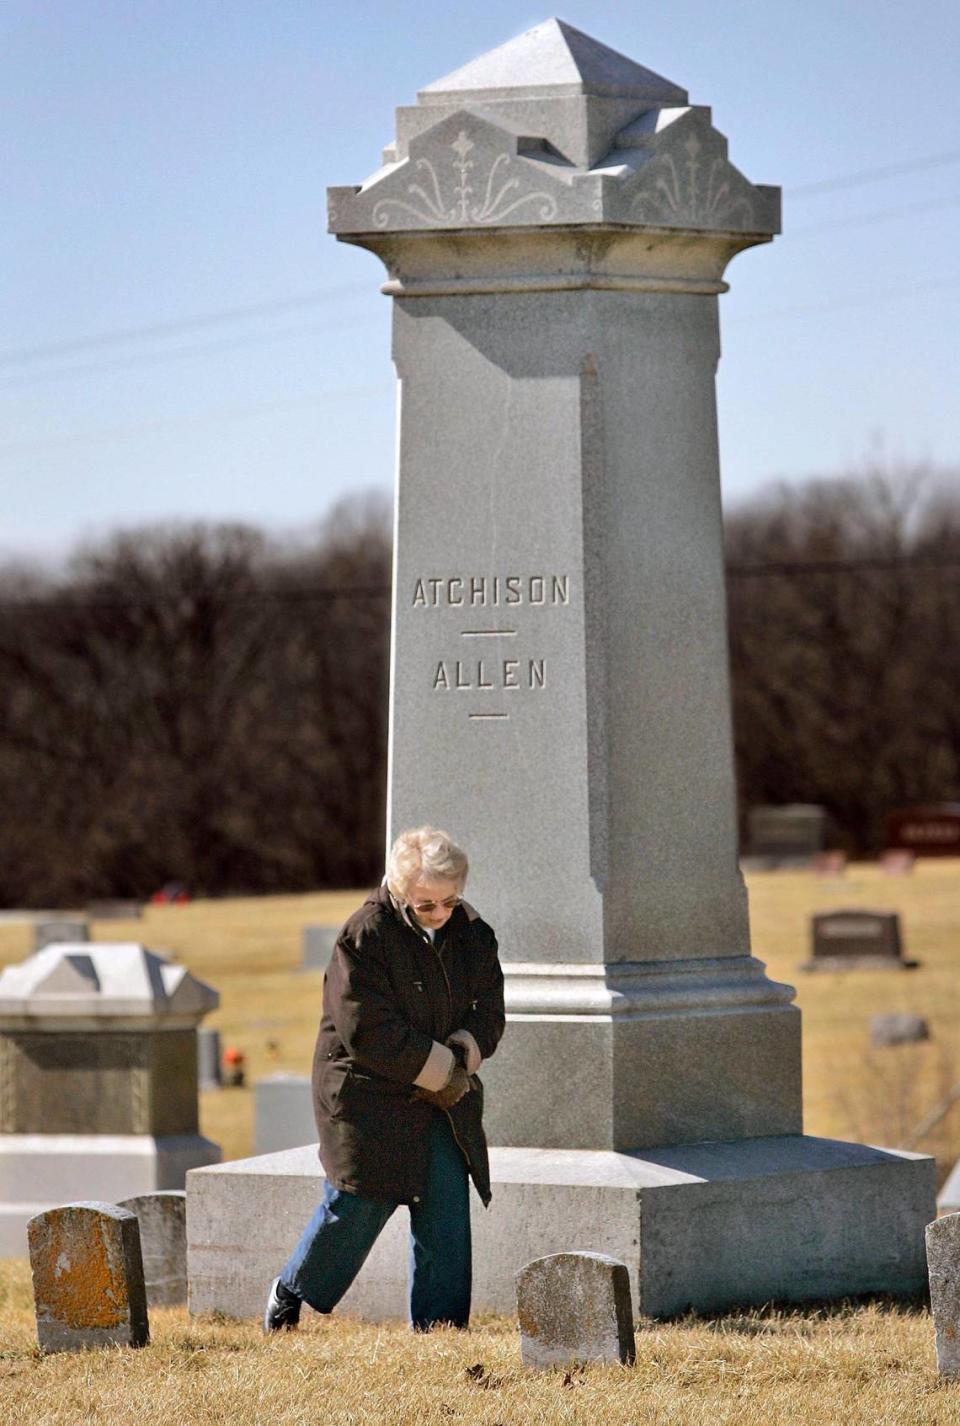 David Rice Atchison served as president of the United States for one day. The U.S. Senator from Missouri is buried at Green Lawn Cemetery in Plattsburg, Missouri.